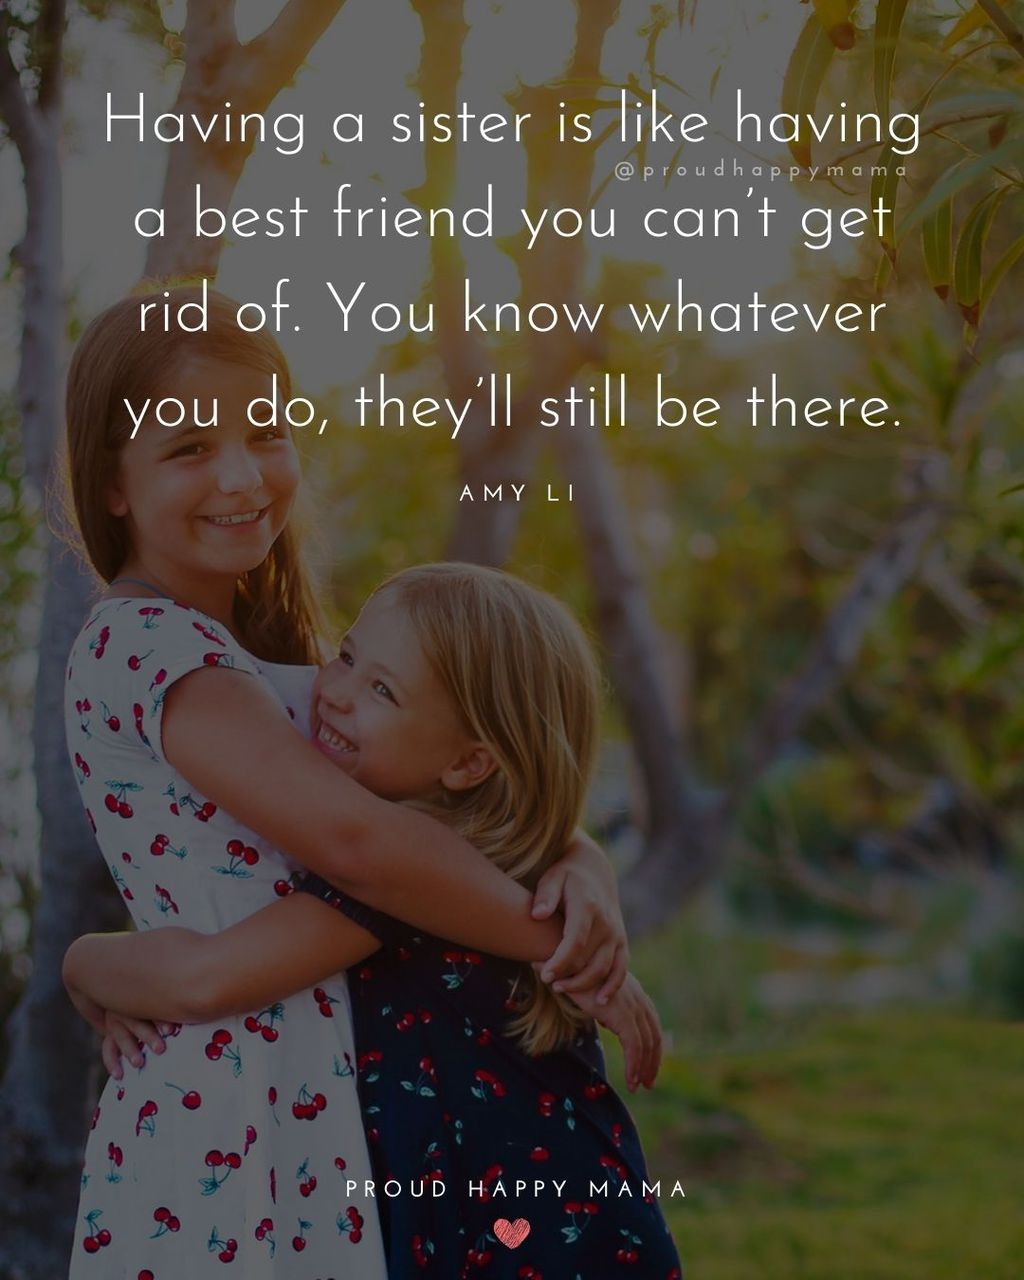 Funny Sister Quotes - Having a sister is like having a best friend you can’t get rid of. You know whatever you do, they’ll still be there. - Amy Li